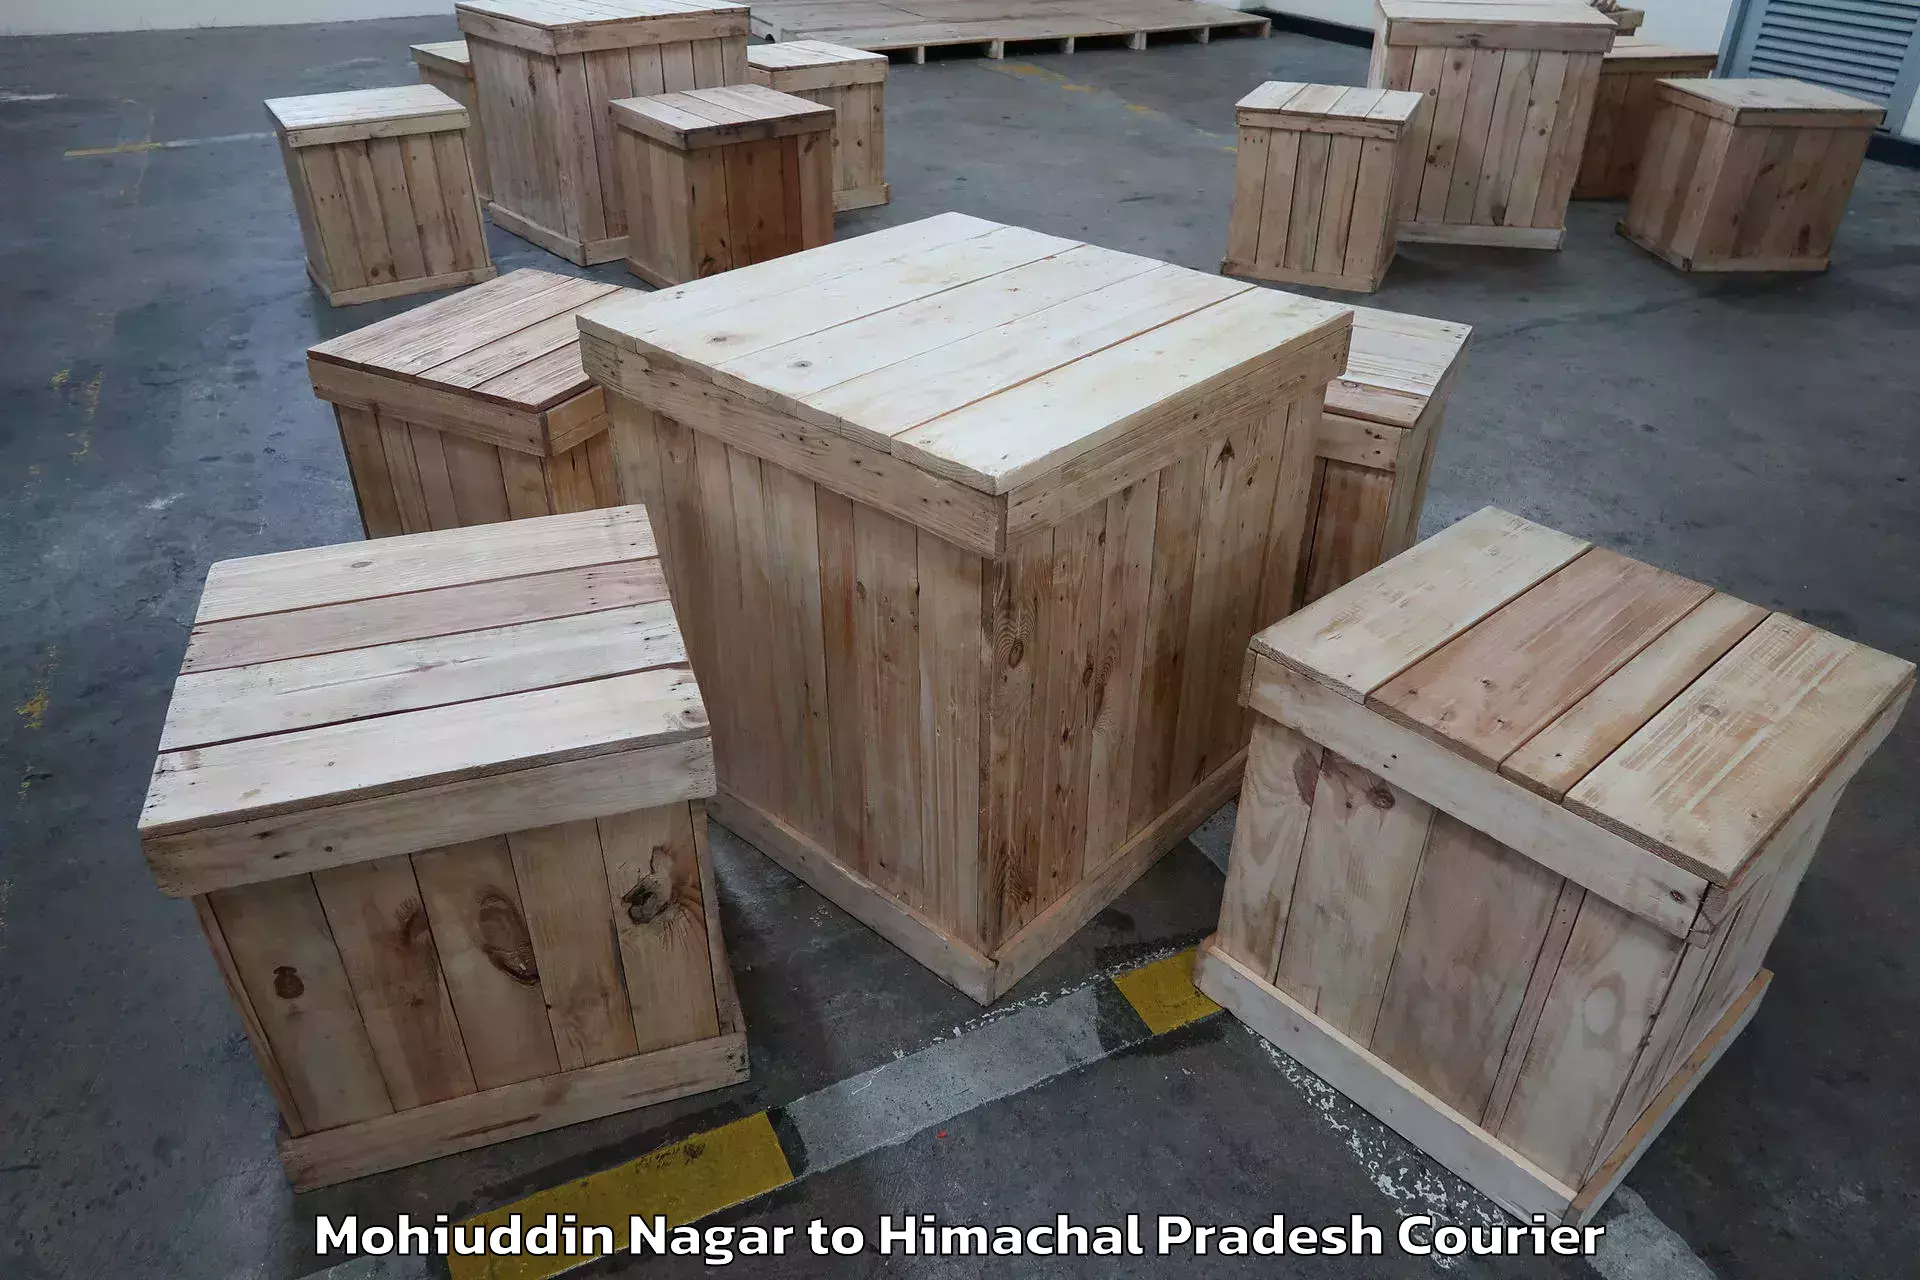 Dependable moving services in Mohiuddin Nagar to Rampur Bushahr